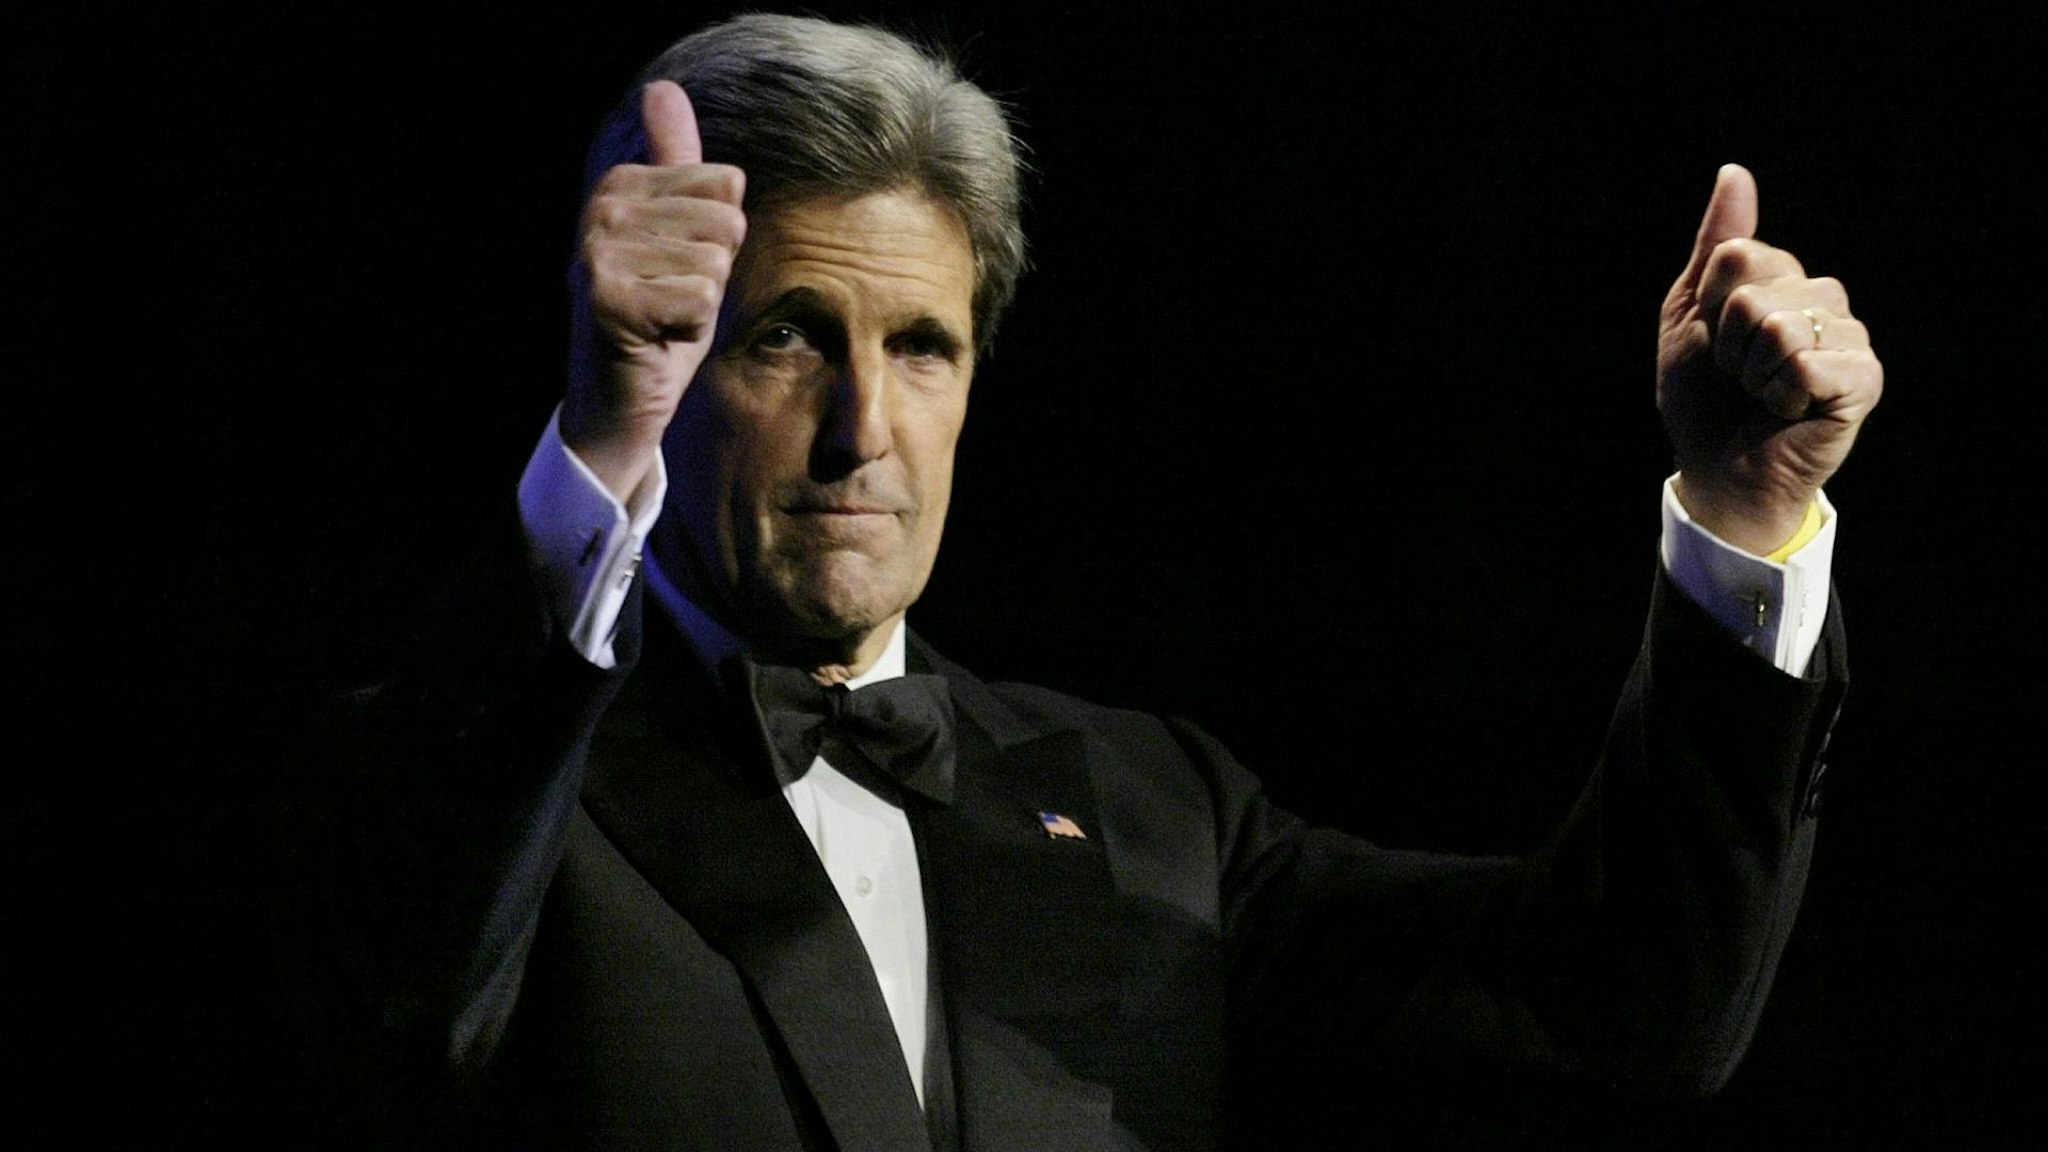 Democratic Presidential Nominee US Senator John Kerry speaks at the Congressional Black Caucus Foundation Annual Legislative Conference Dinner at the Washington Convention Center in Washington, DC, 11 September 2004.